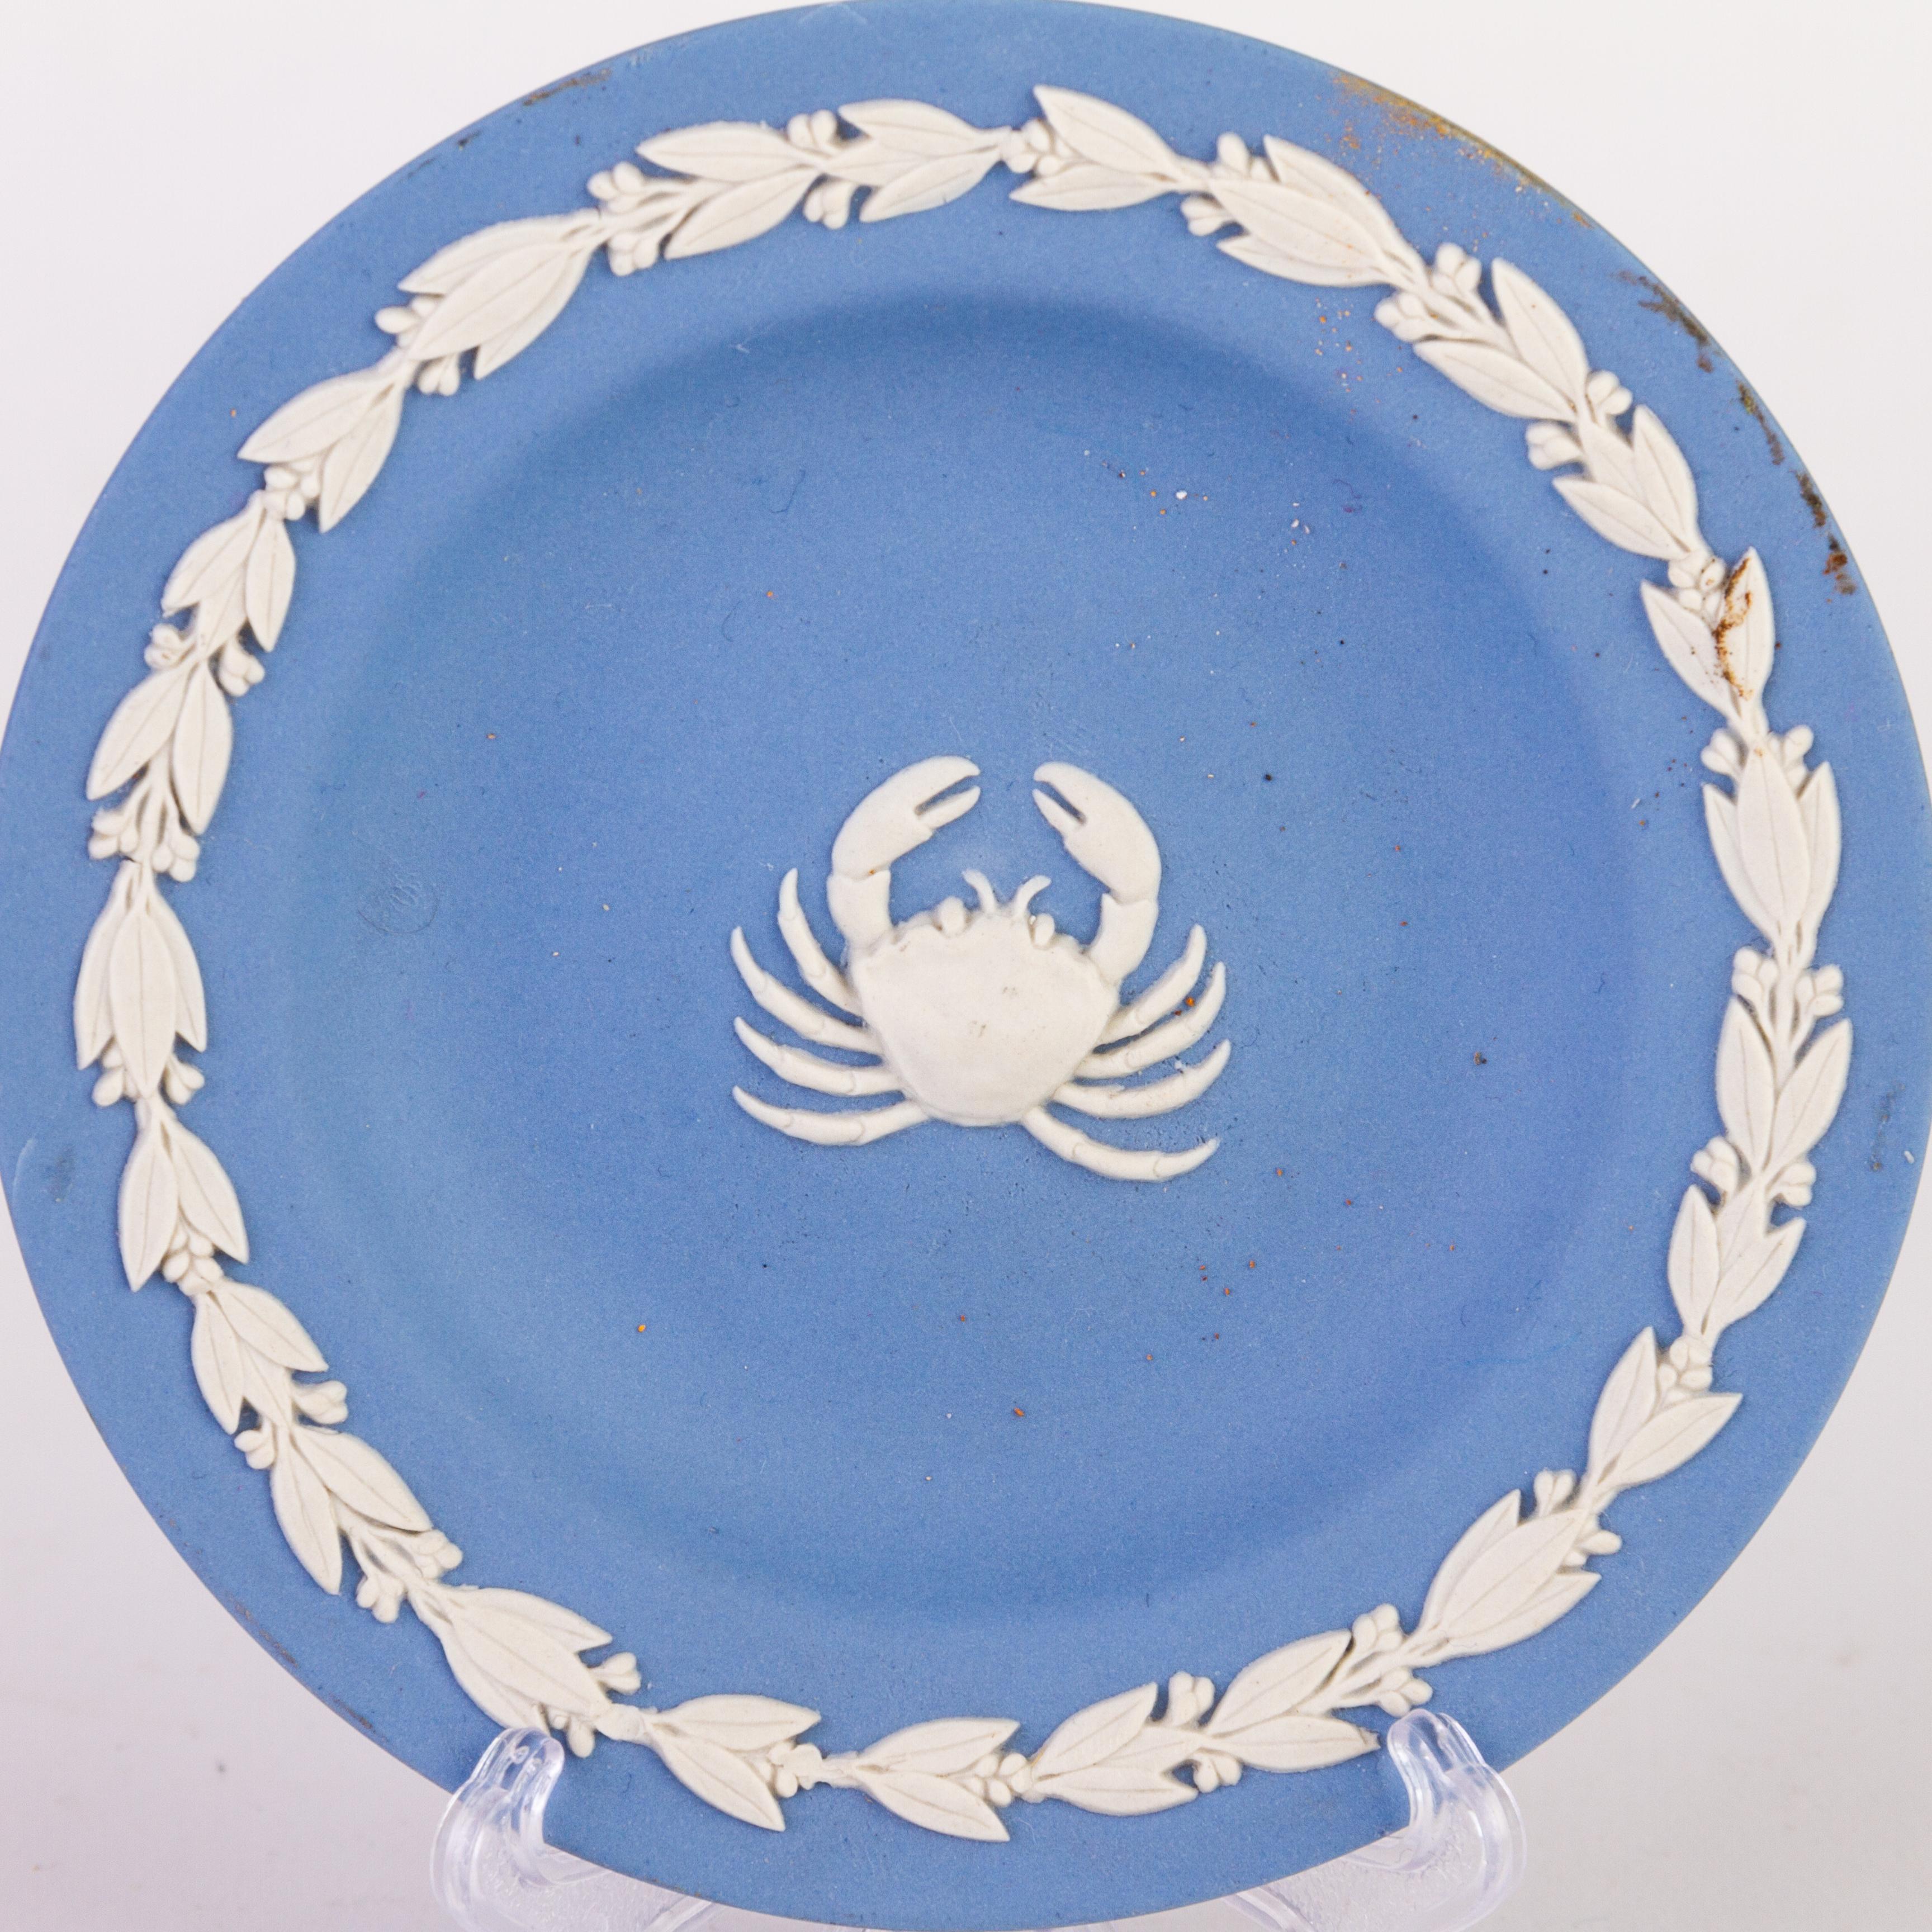 Wedgwood Blue Jasperware Cameo Zodiac Dish Tray 
Good condition overall, see photos.
From a private collection.

Free international shipping.